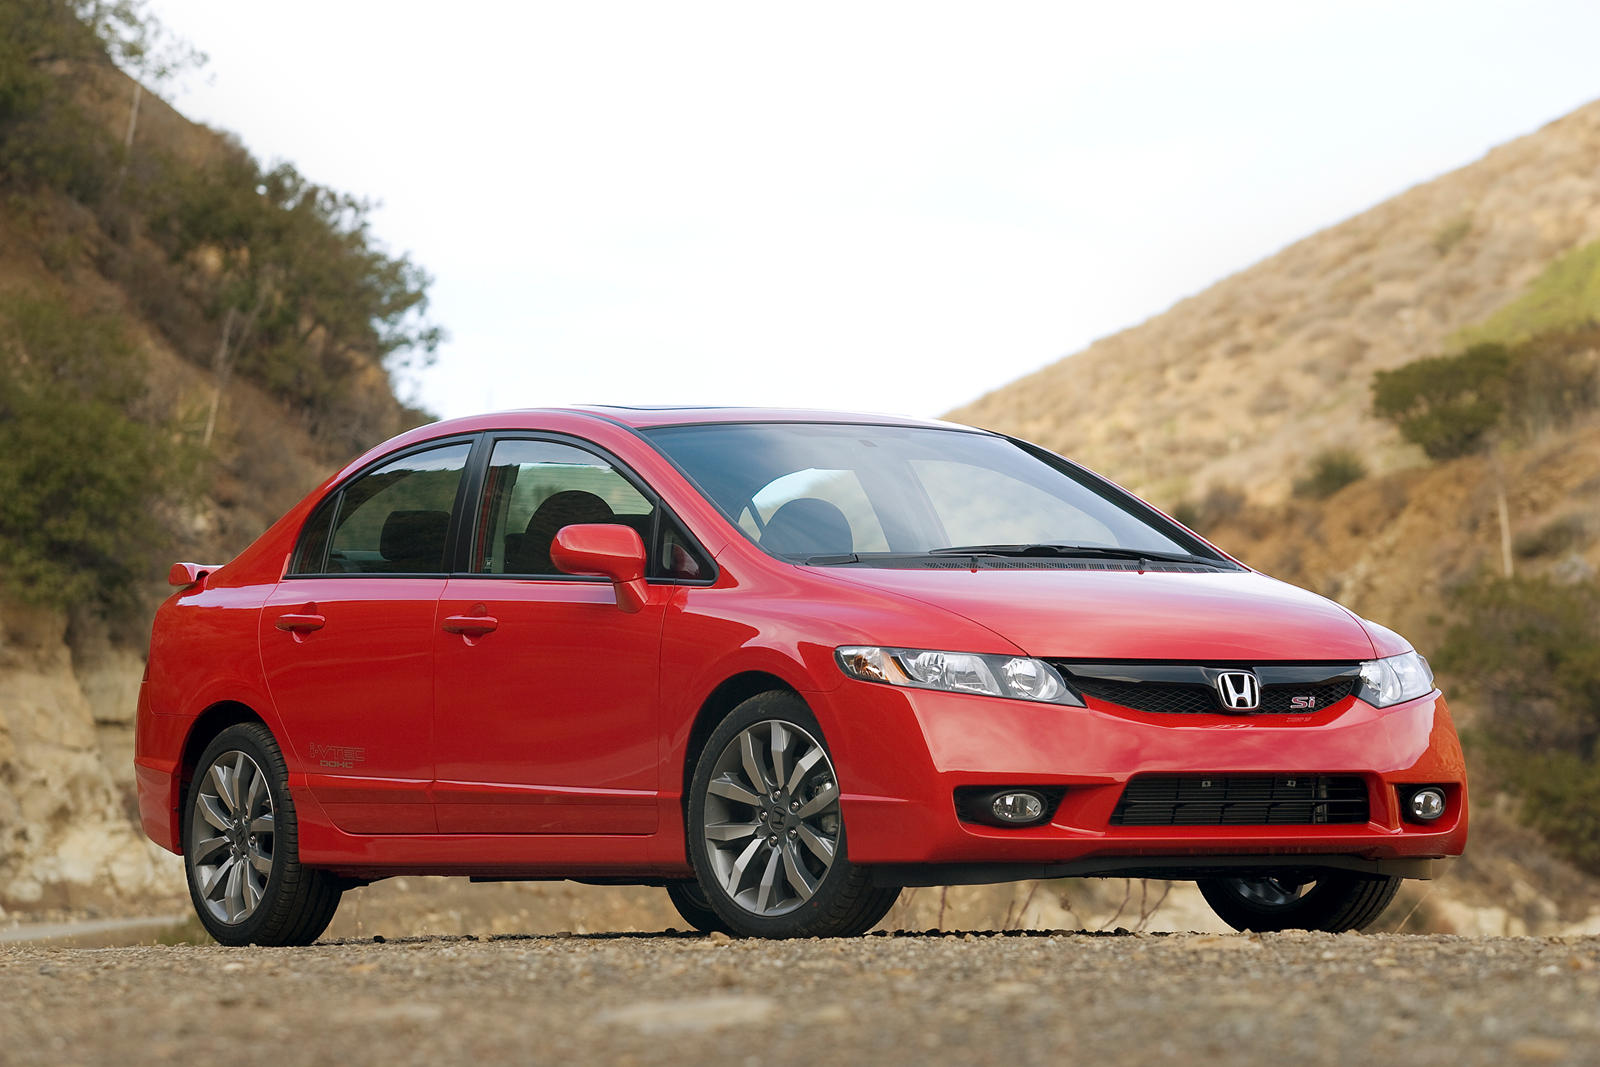 2011 Civic Si Sedan: Review, Trims, Specs, Price, New Interior Features, Exterior Design, and Specifications | CarBuzz